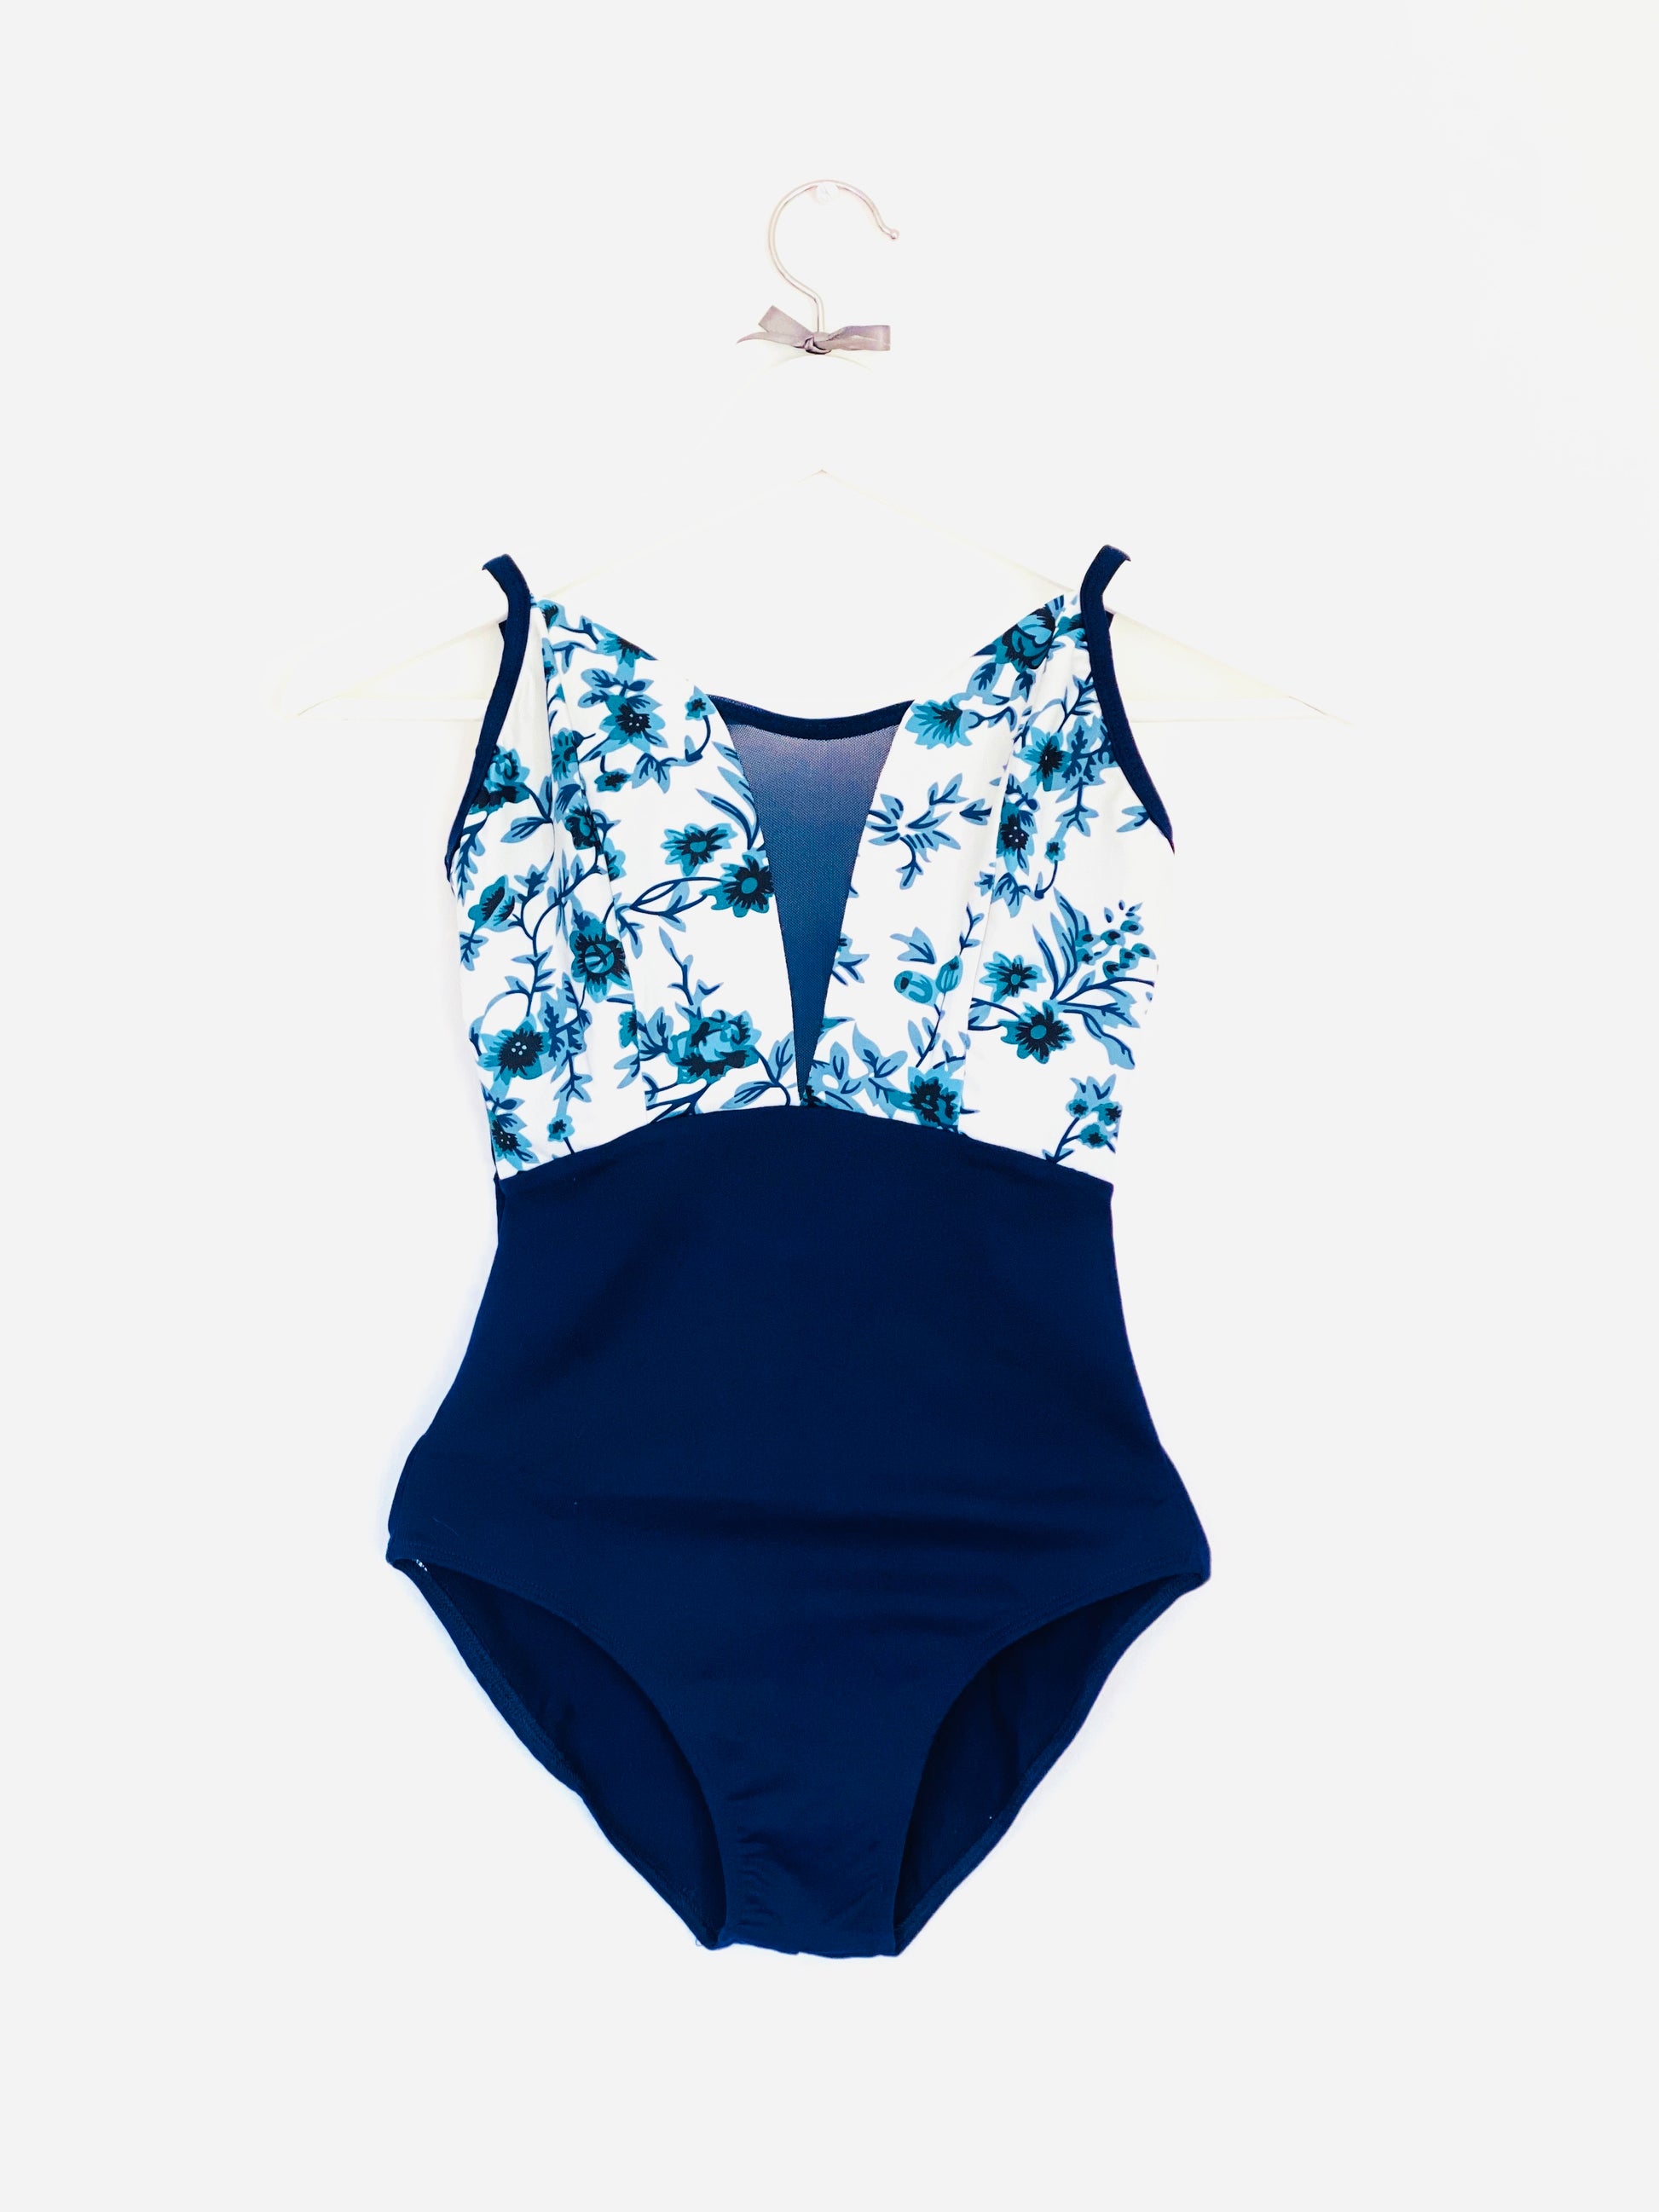 V mesh leotard with floral print in navy and white The Collective Dancewear